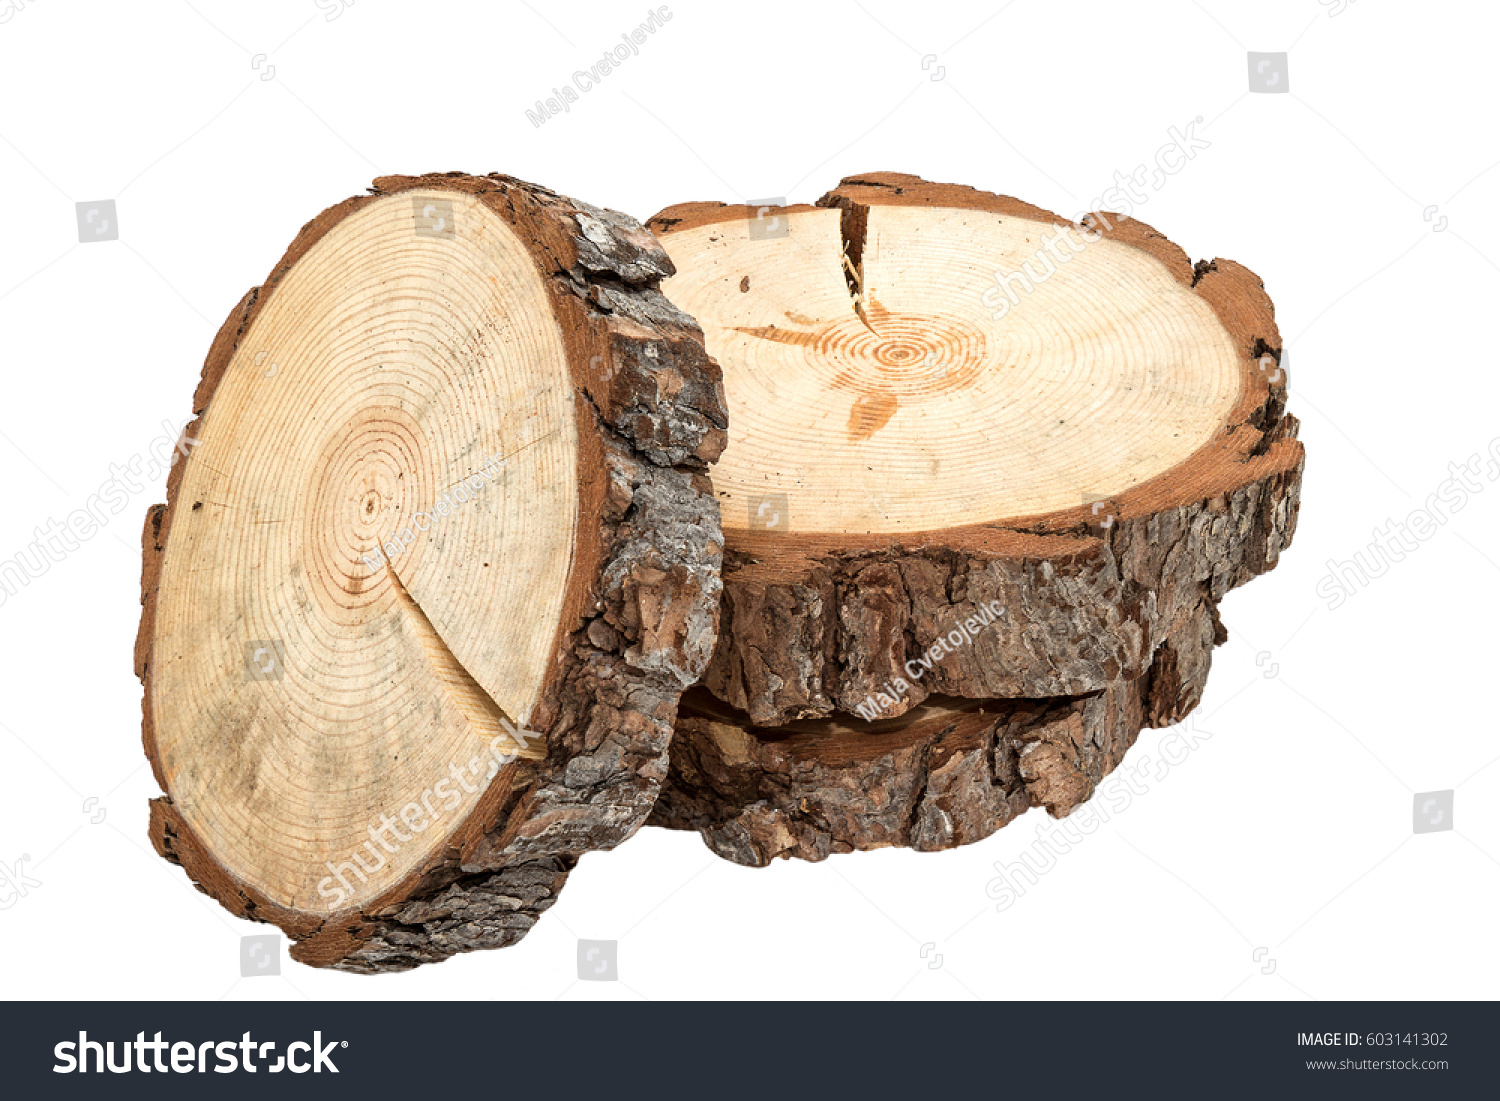 Cross section of tree trunk on white background  #603141302